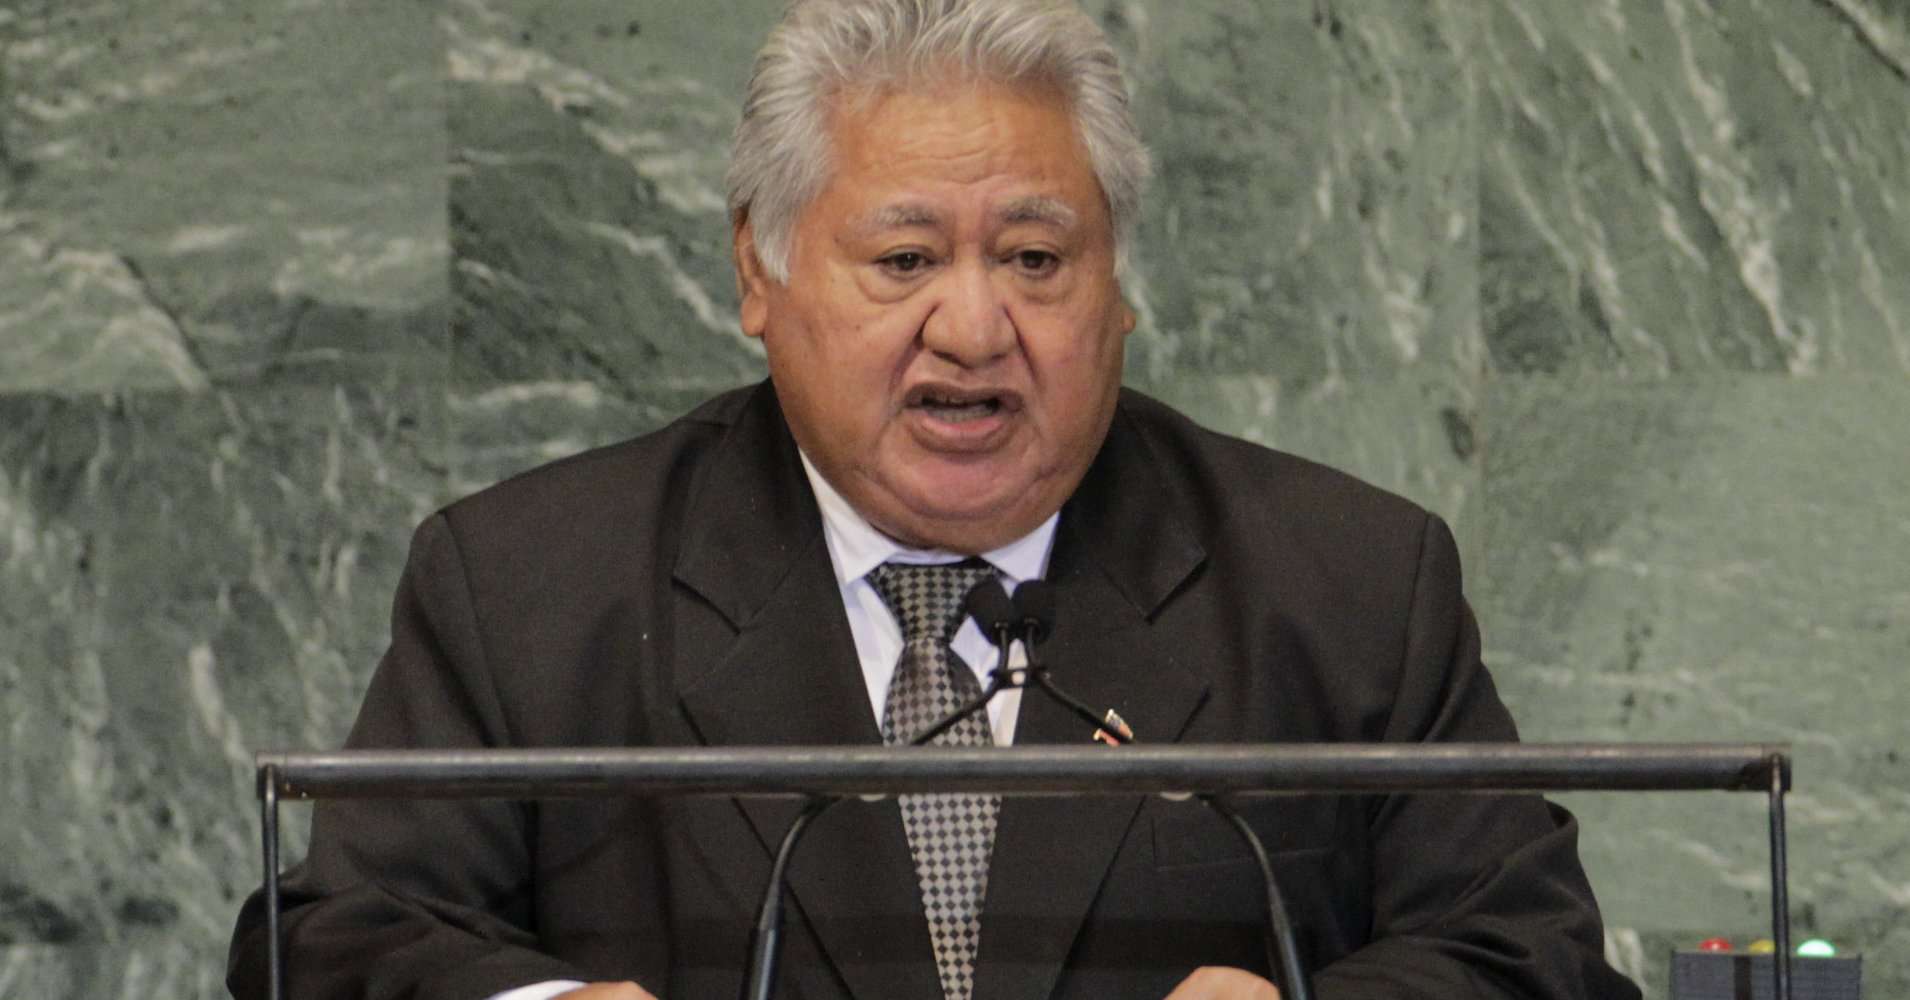 image for Samoan Prime Minister: Leaders Who Deny Climate Change Are 'Utterly Stupid'